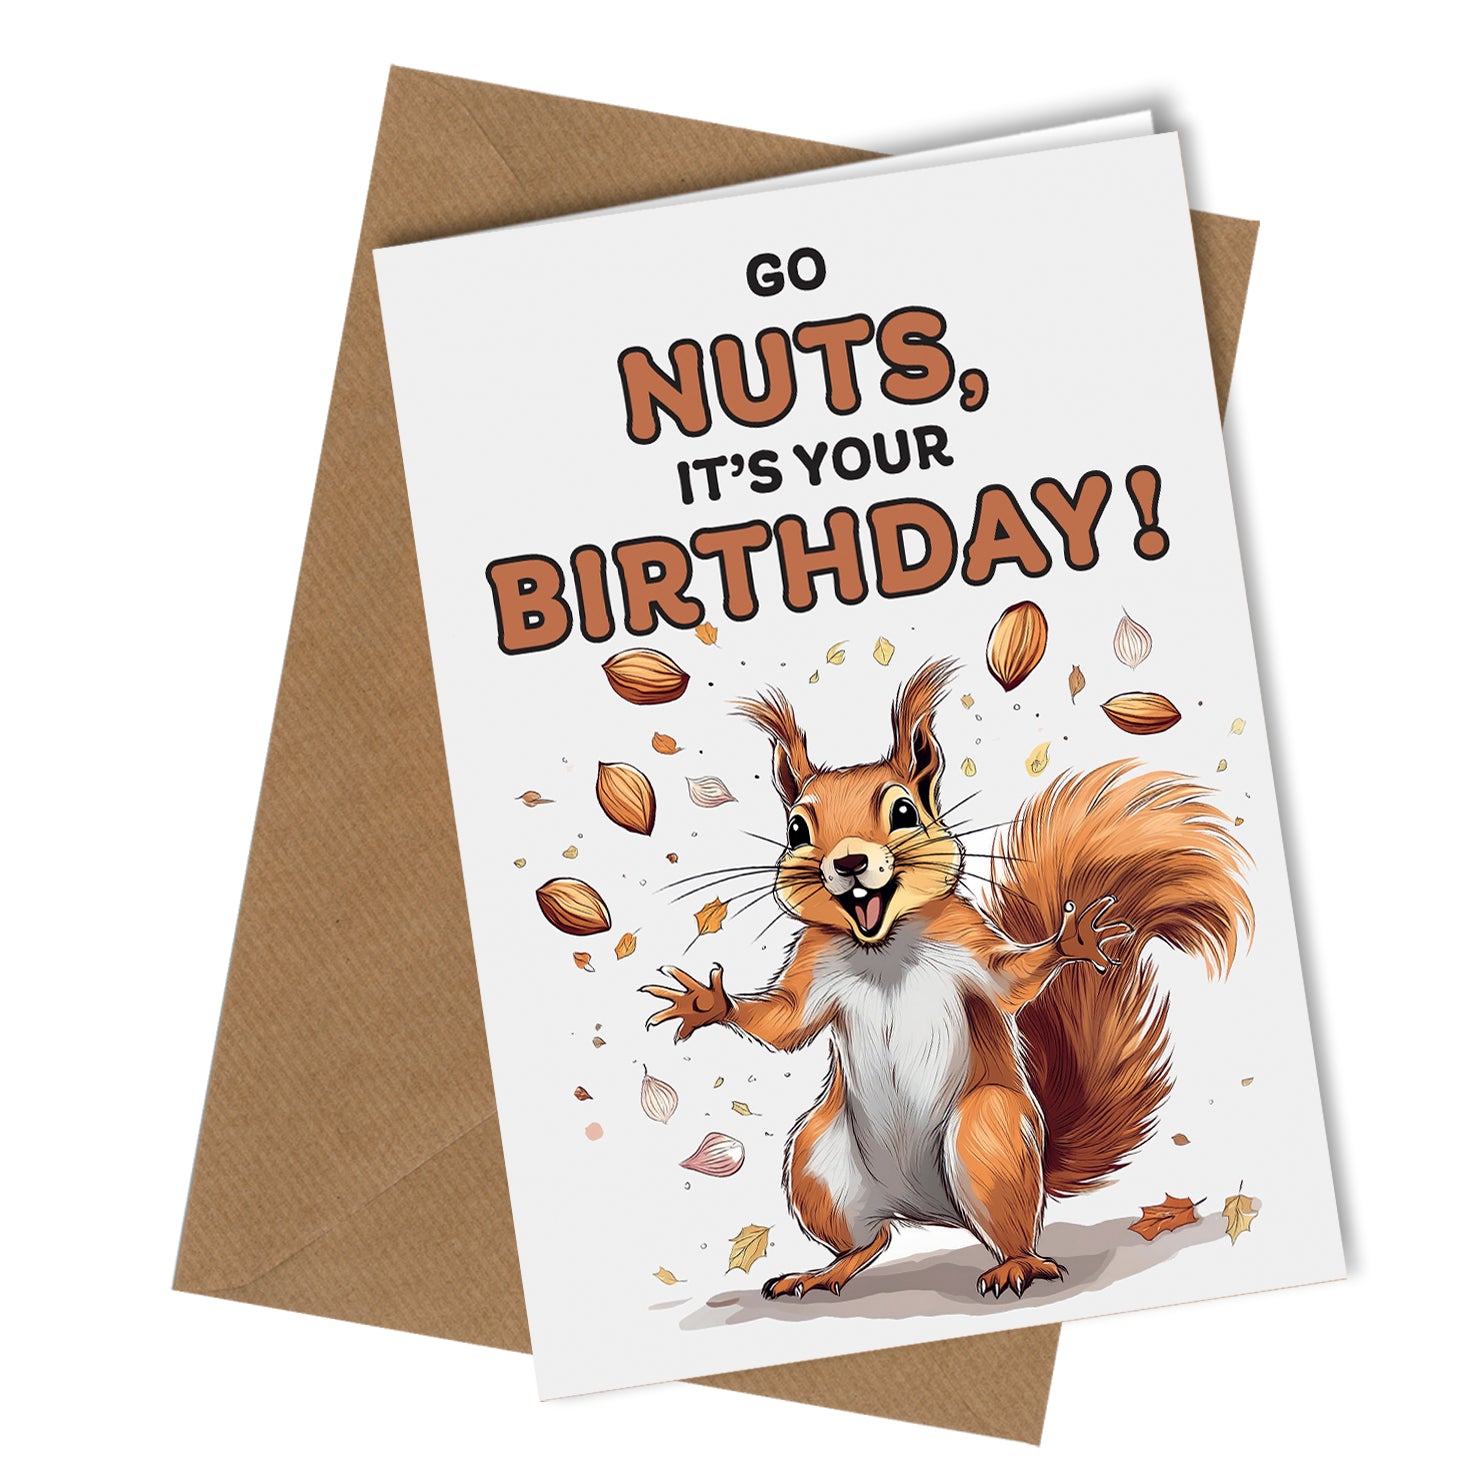 #1609 Go Nuts!